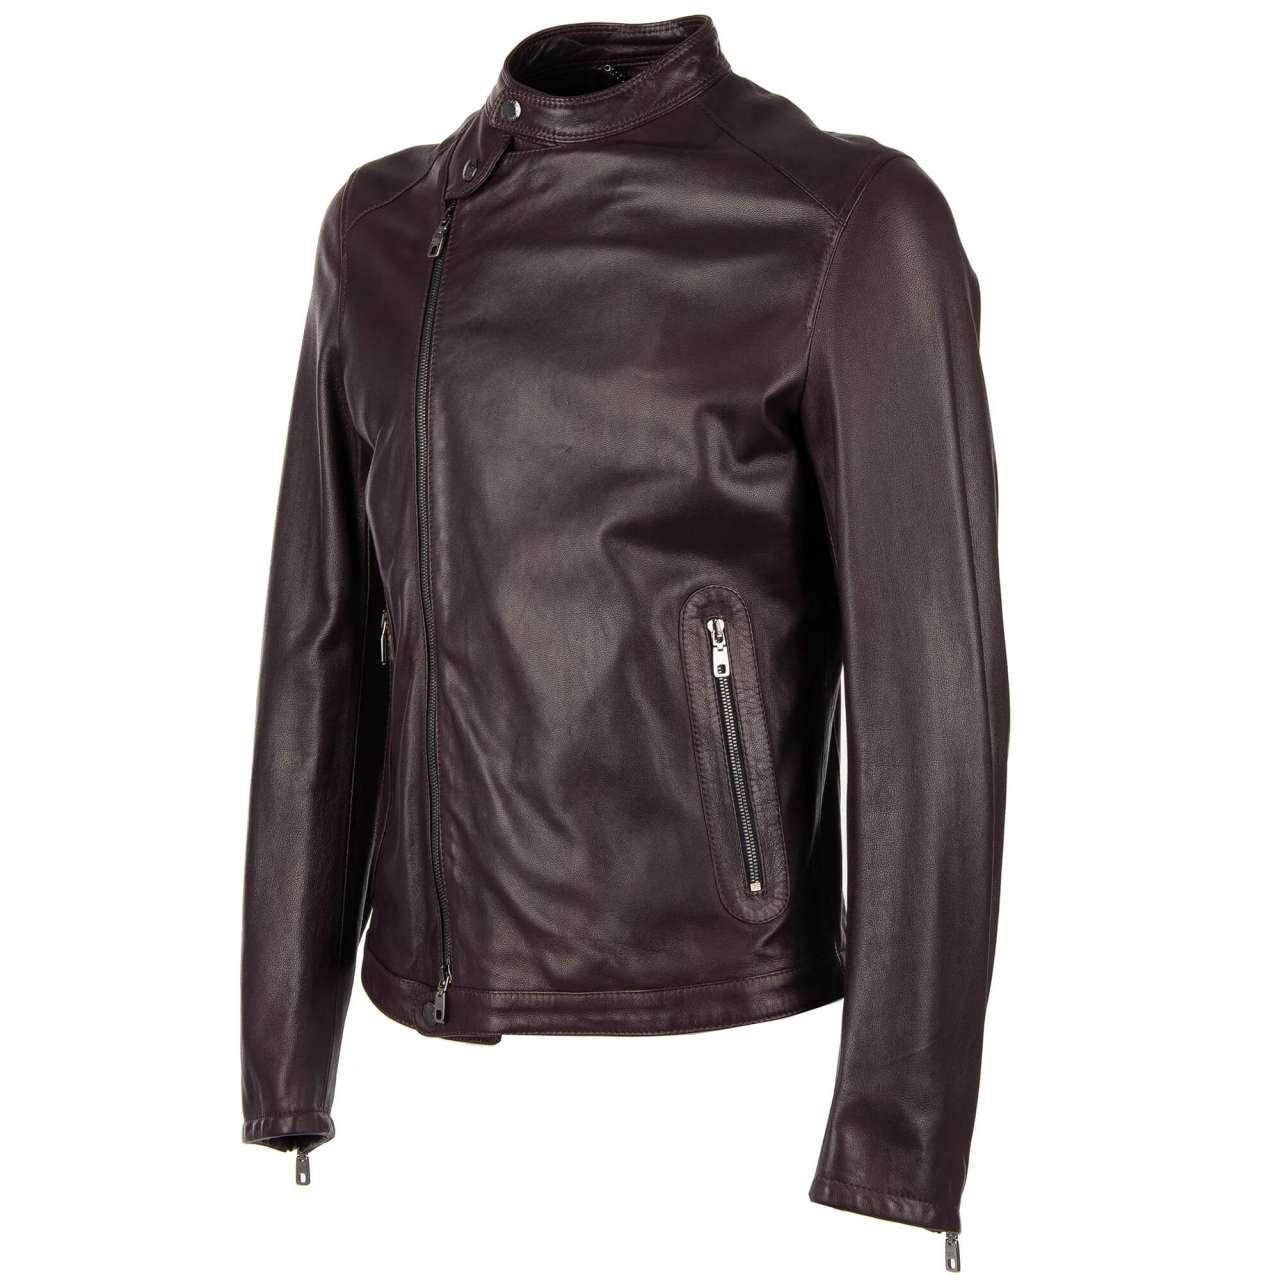 - Biker style nappa lamb leather jacket with zip pockets and Logo by DOLCE & GABBANA - New with tag - Former RRP: EUR 2.450 - MADE IN ITALY - Slim Fit - Model: G9LN1L-HULBB-M2762 - Material: 100% Lambskin - Lining: 90% Silk, 10% Lambskin - Color: